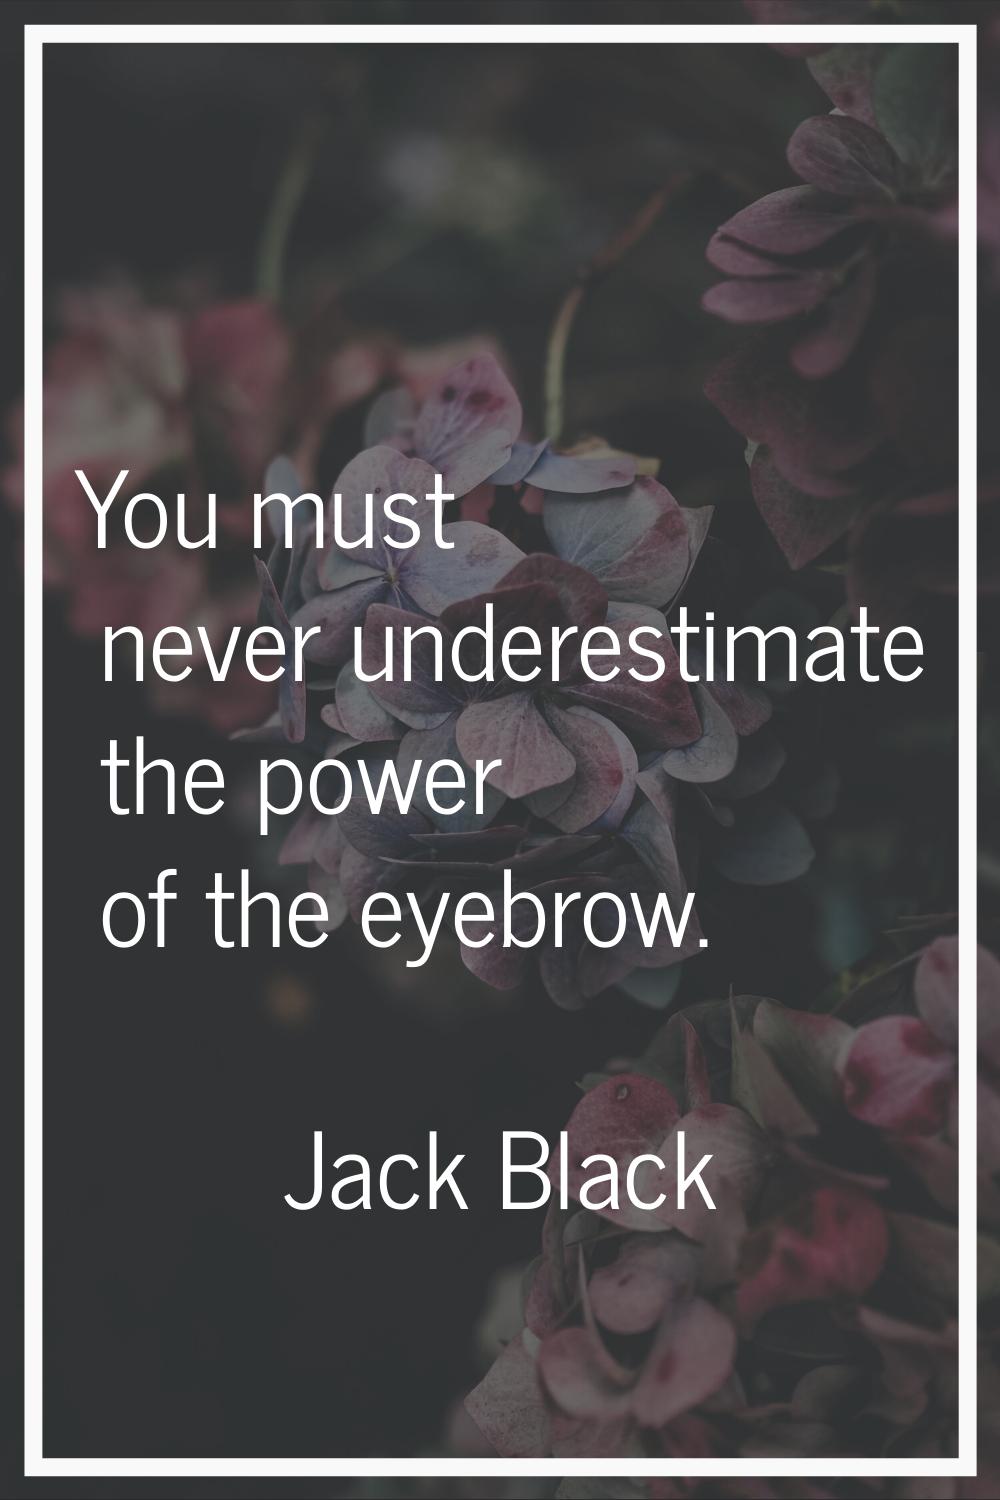 You must never underestimate the power of the eyebrow.